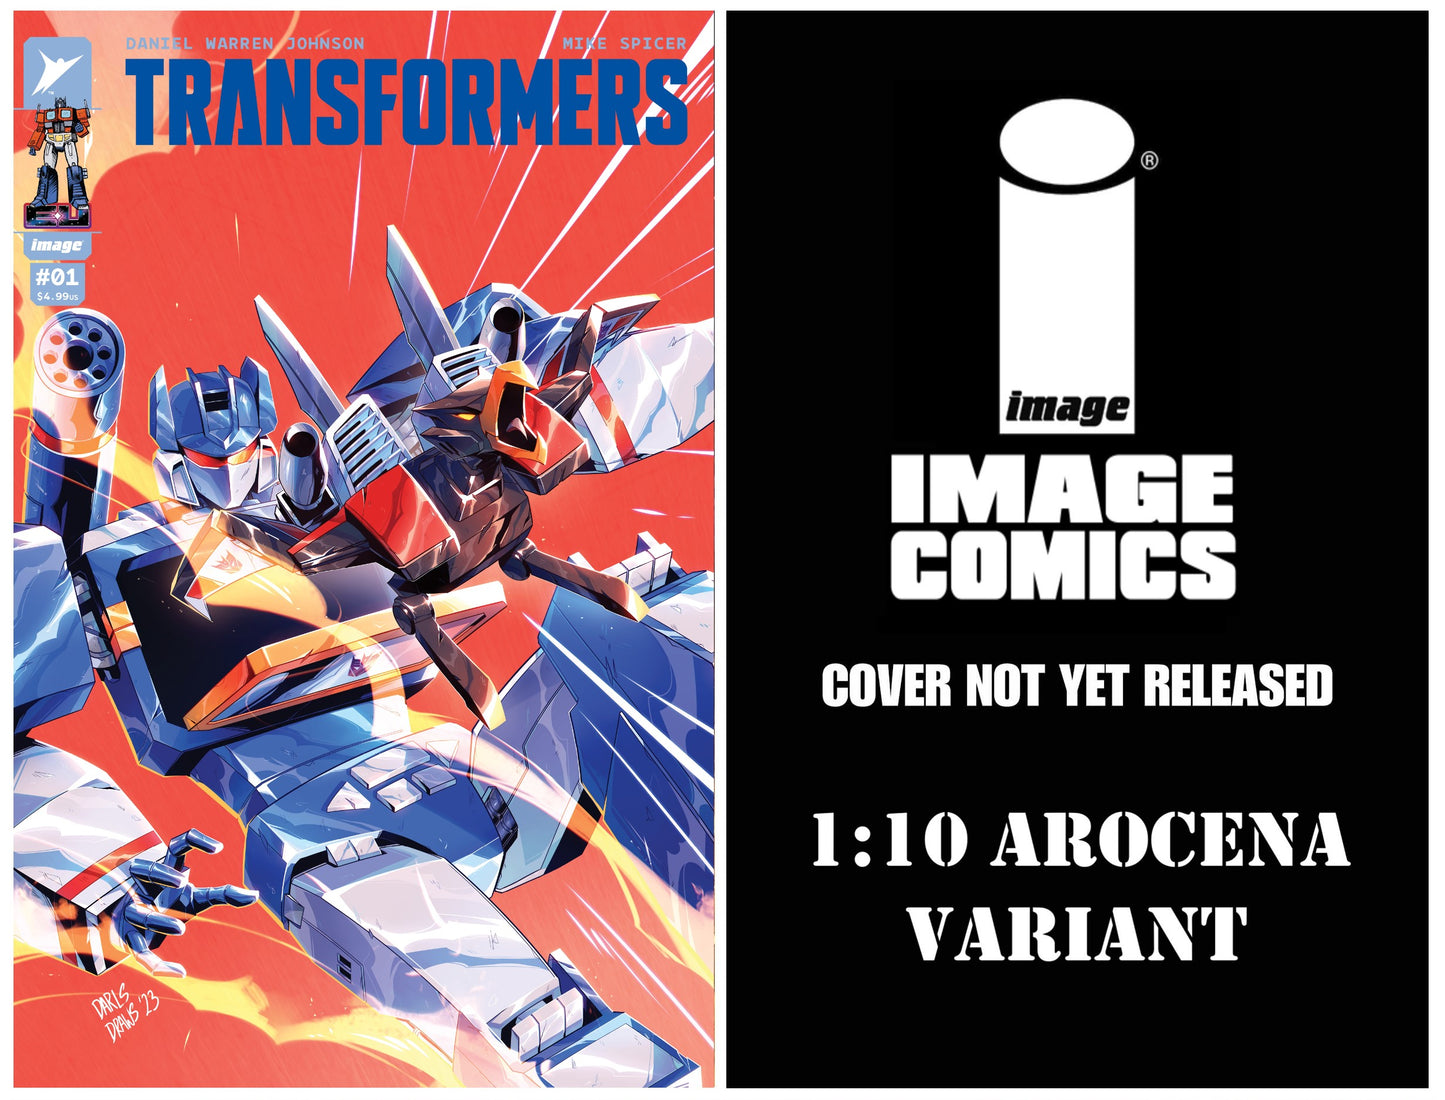 TRANSFORMERS #1 DARLSDRAWS SOUNDWAVE VARIANT LIMITED TO 300 COPIES WITH NUMBERED COA + 1:10 AROCENA VARIANT